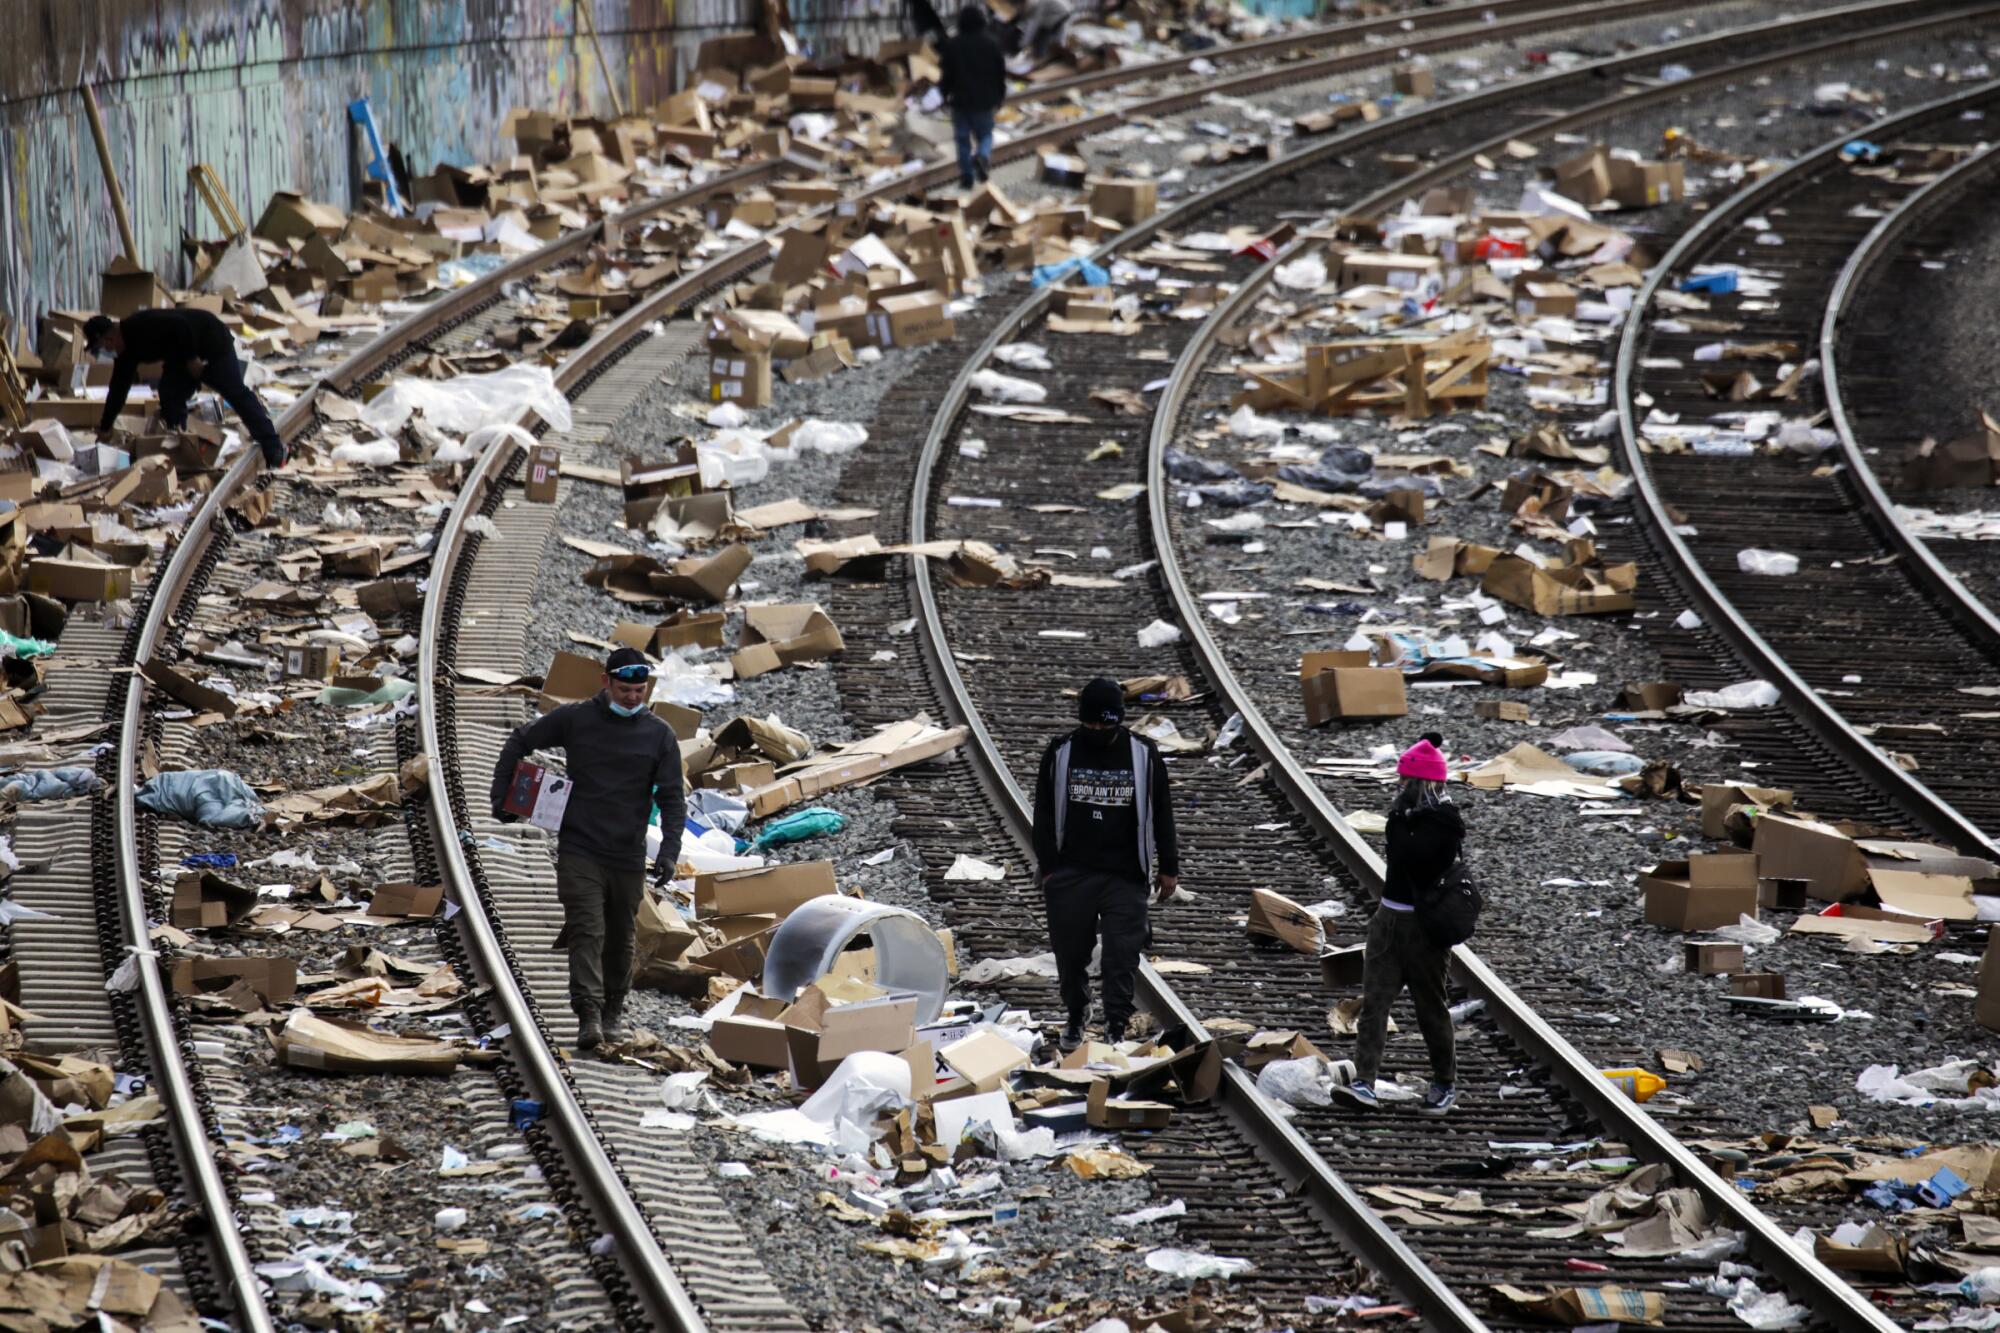 People rummage through boxes left along Union Pacific train tracks near downtown Los Angeles.